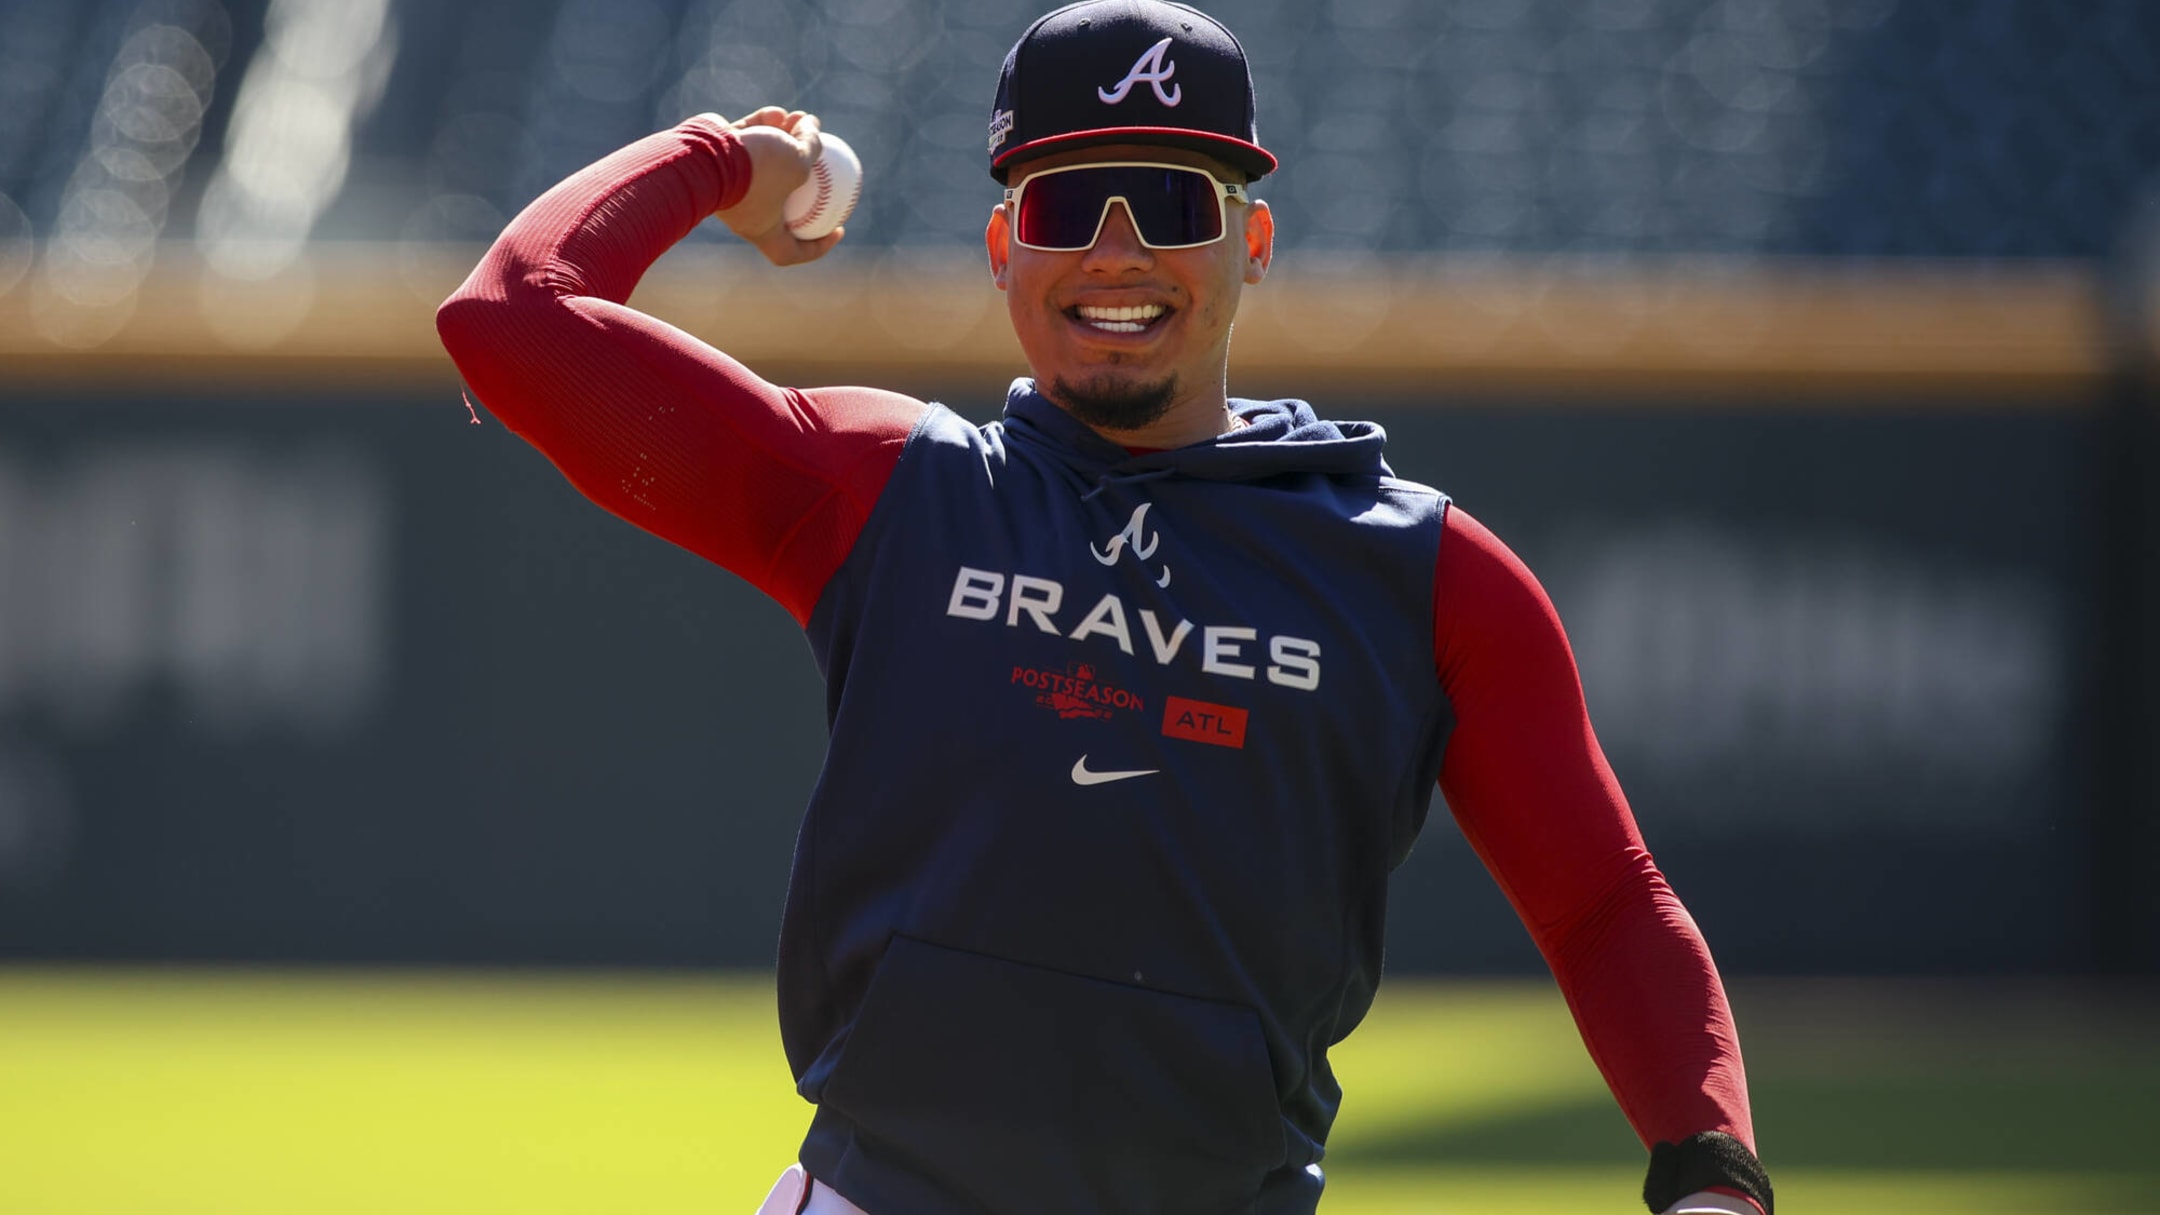 Brewers: William Contreras posts sincere goodbye to Braves organization and  fans